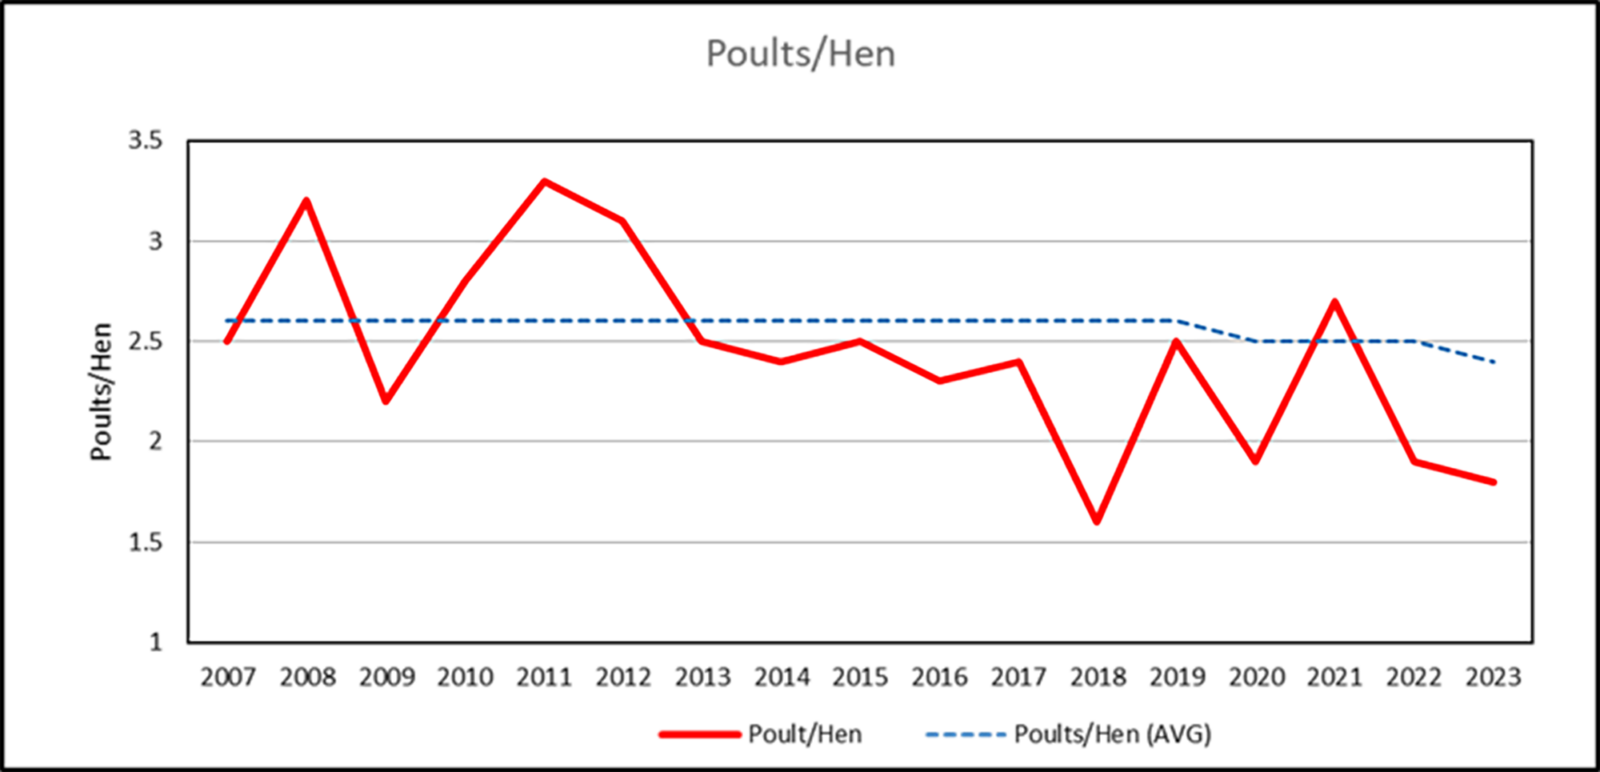 Graph showing the ratio of poults to hens from 2007 through 2023, showing a peak in 2011 and then declines until 2023.